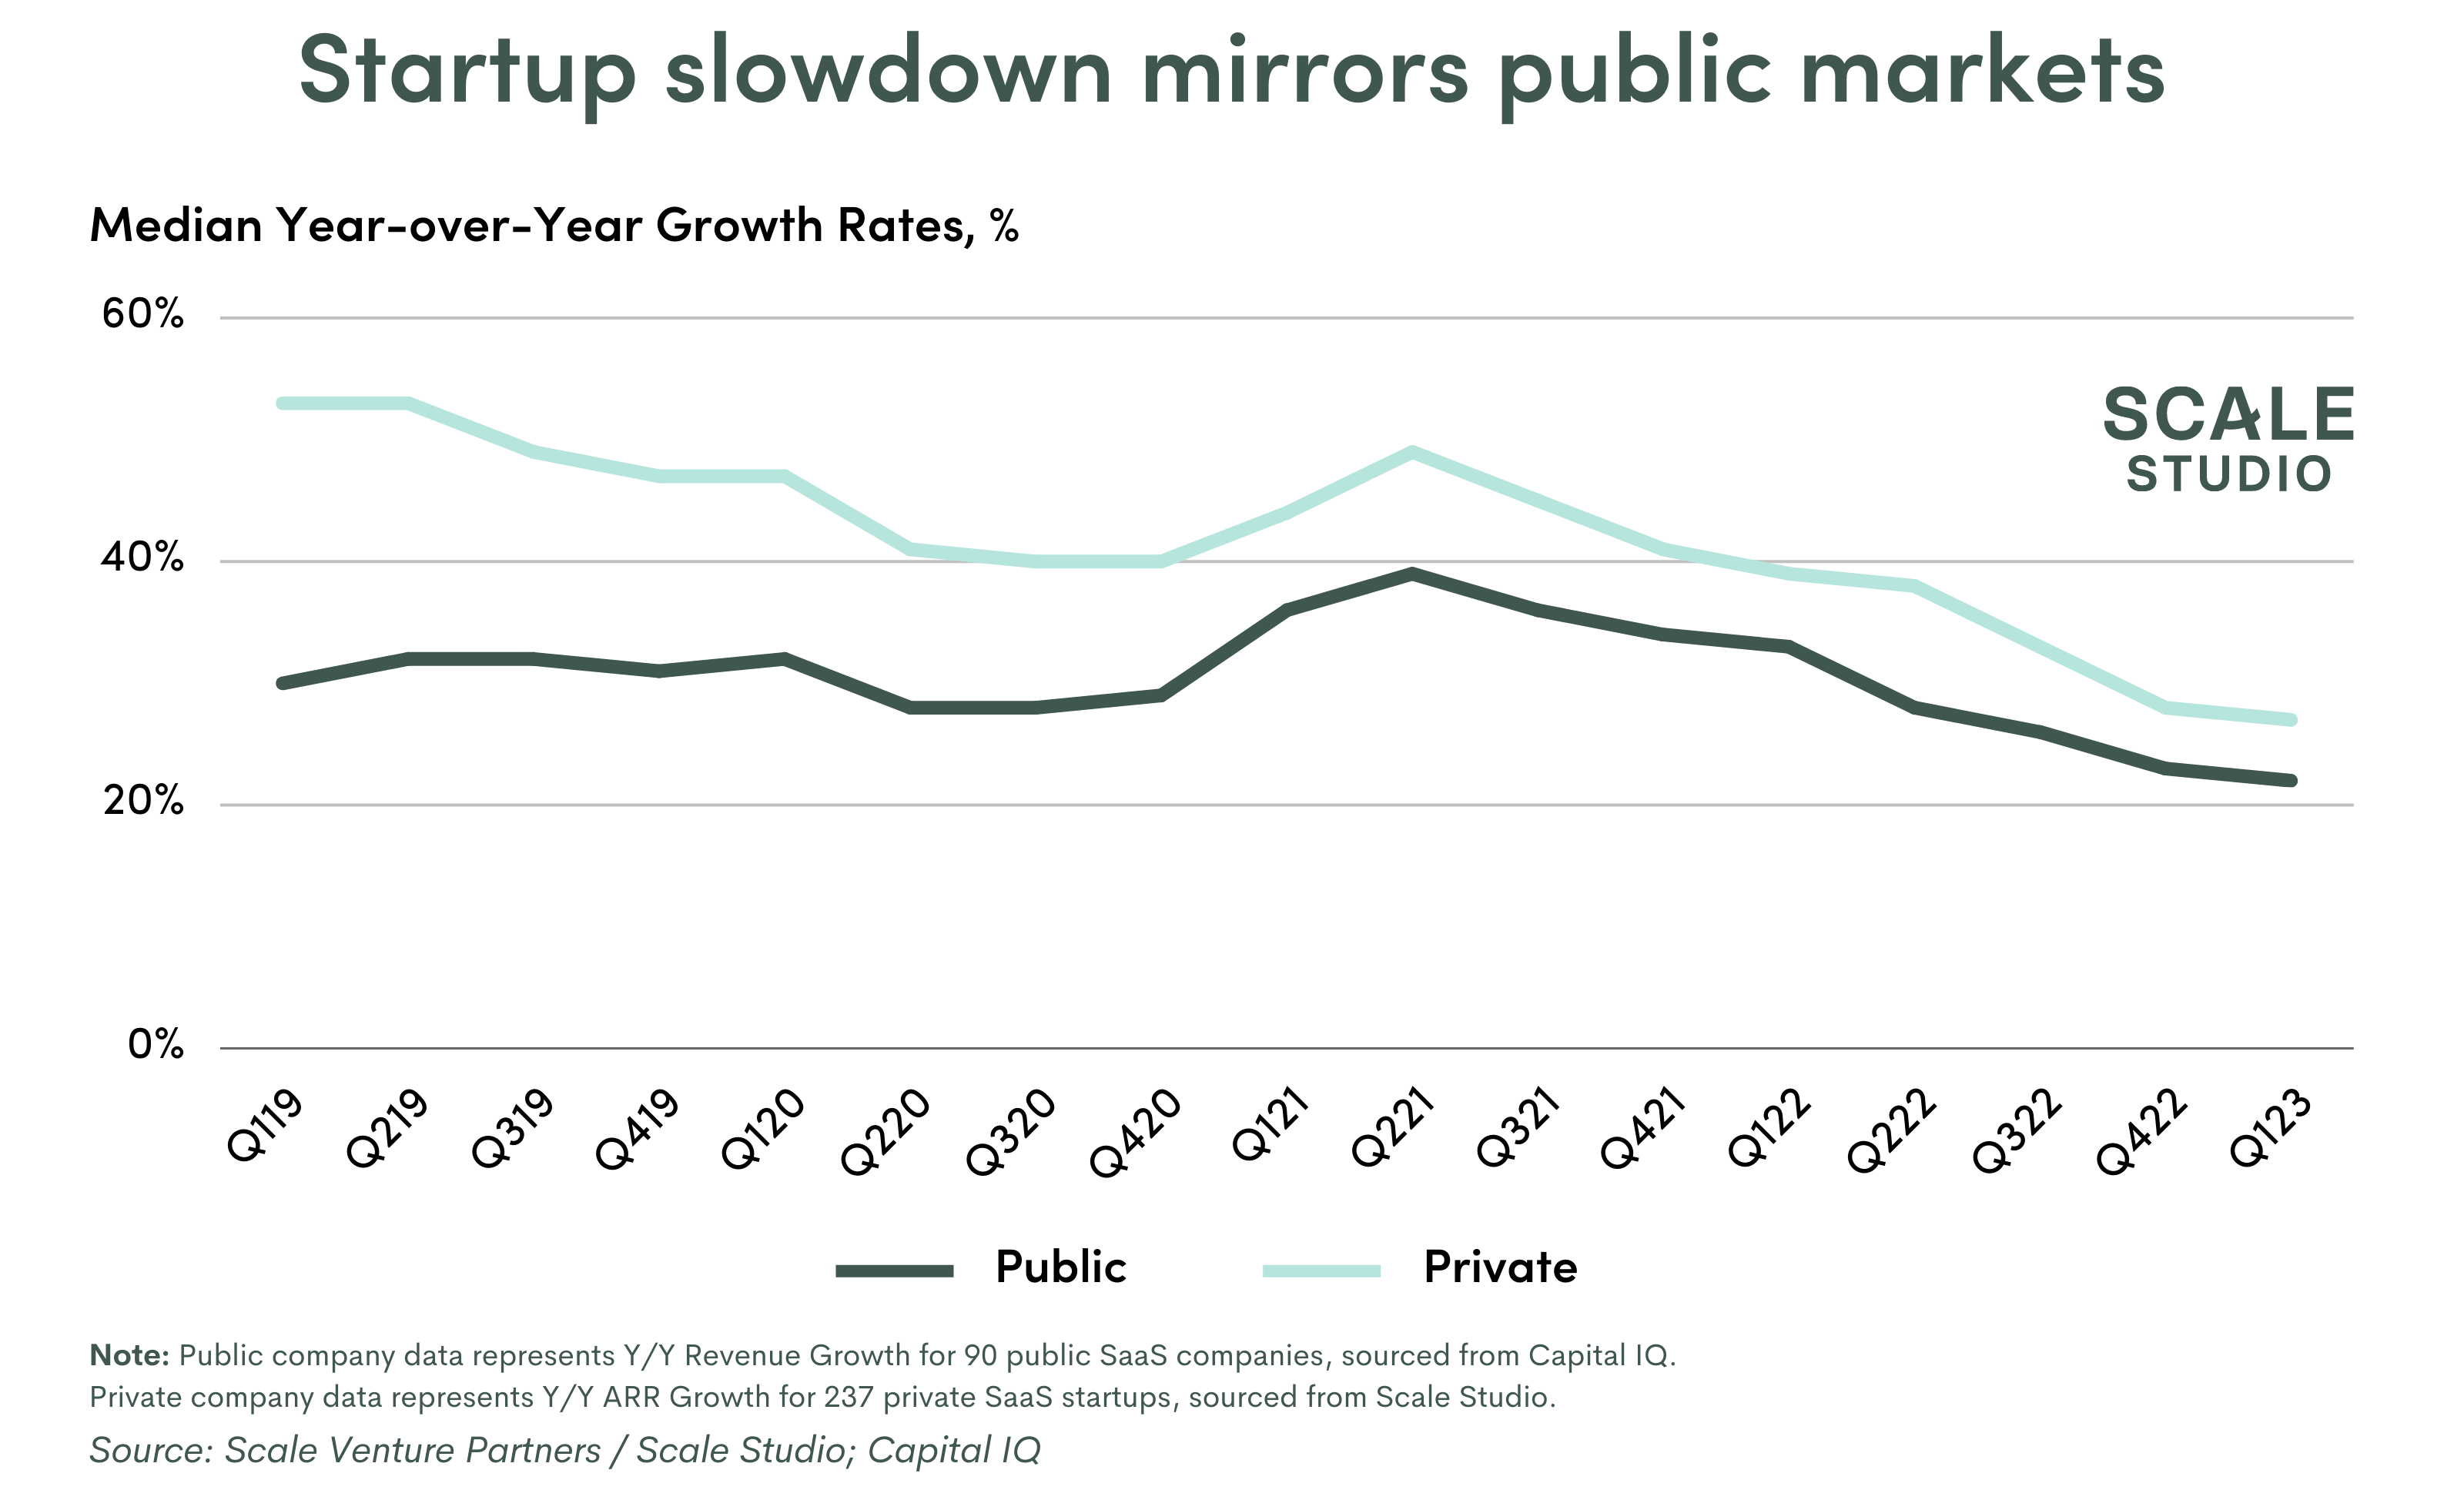 Public and private company growth rates closely mirror each other from 2019 to 2023